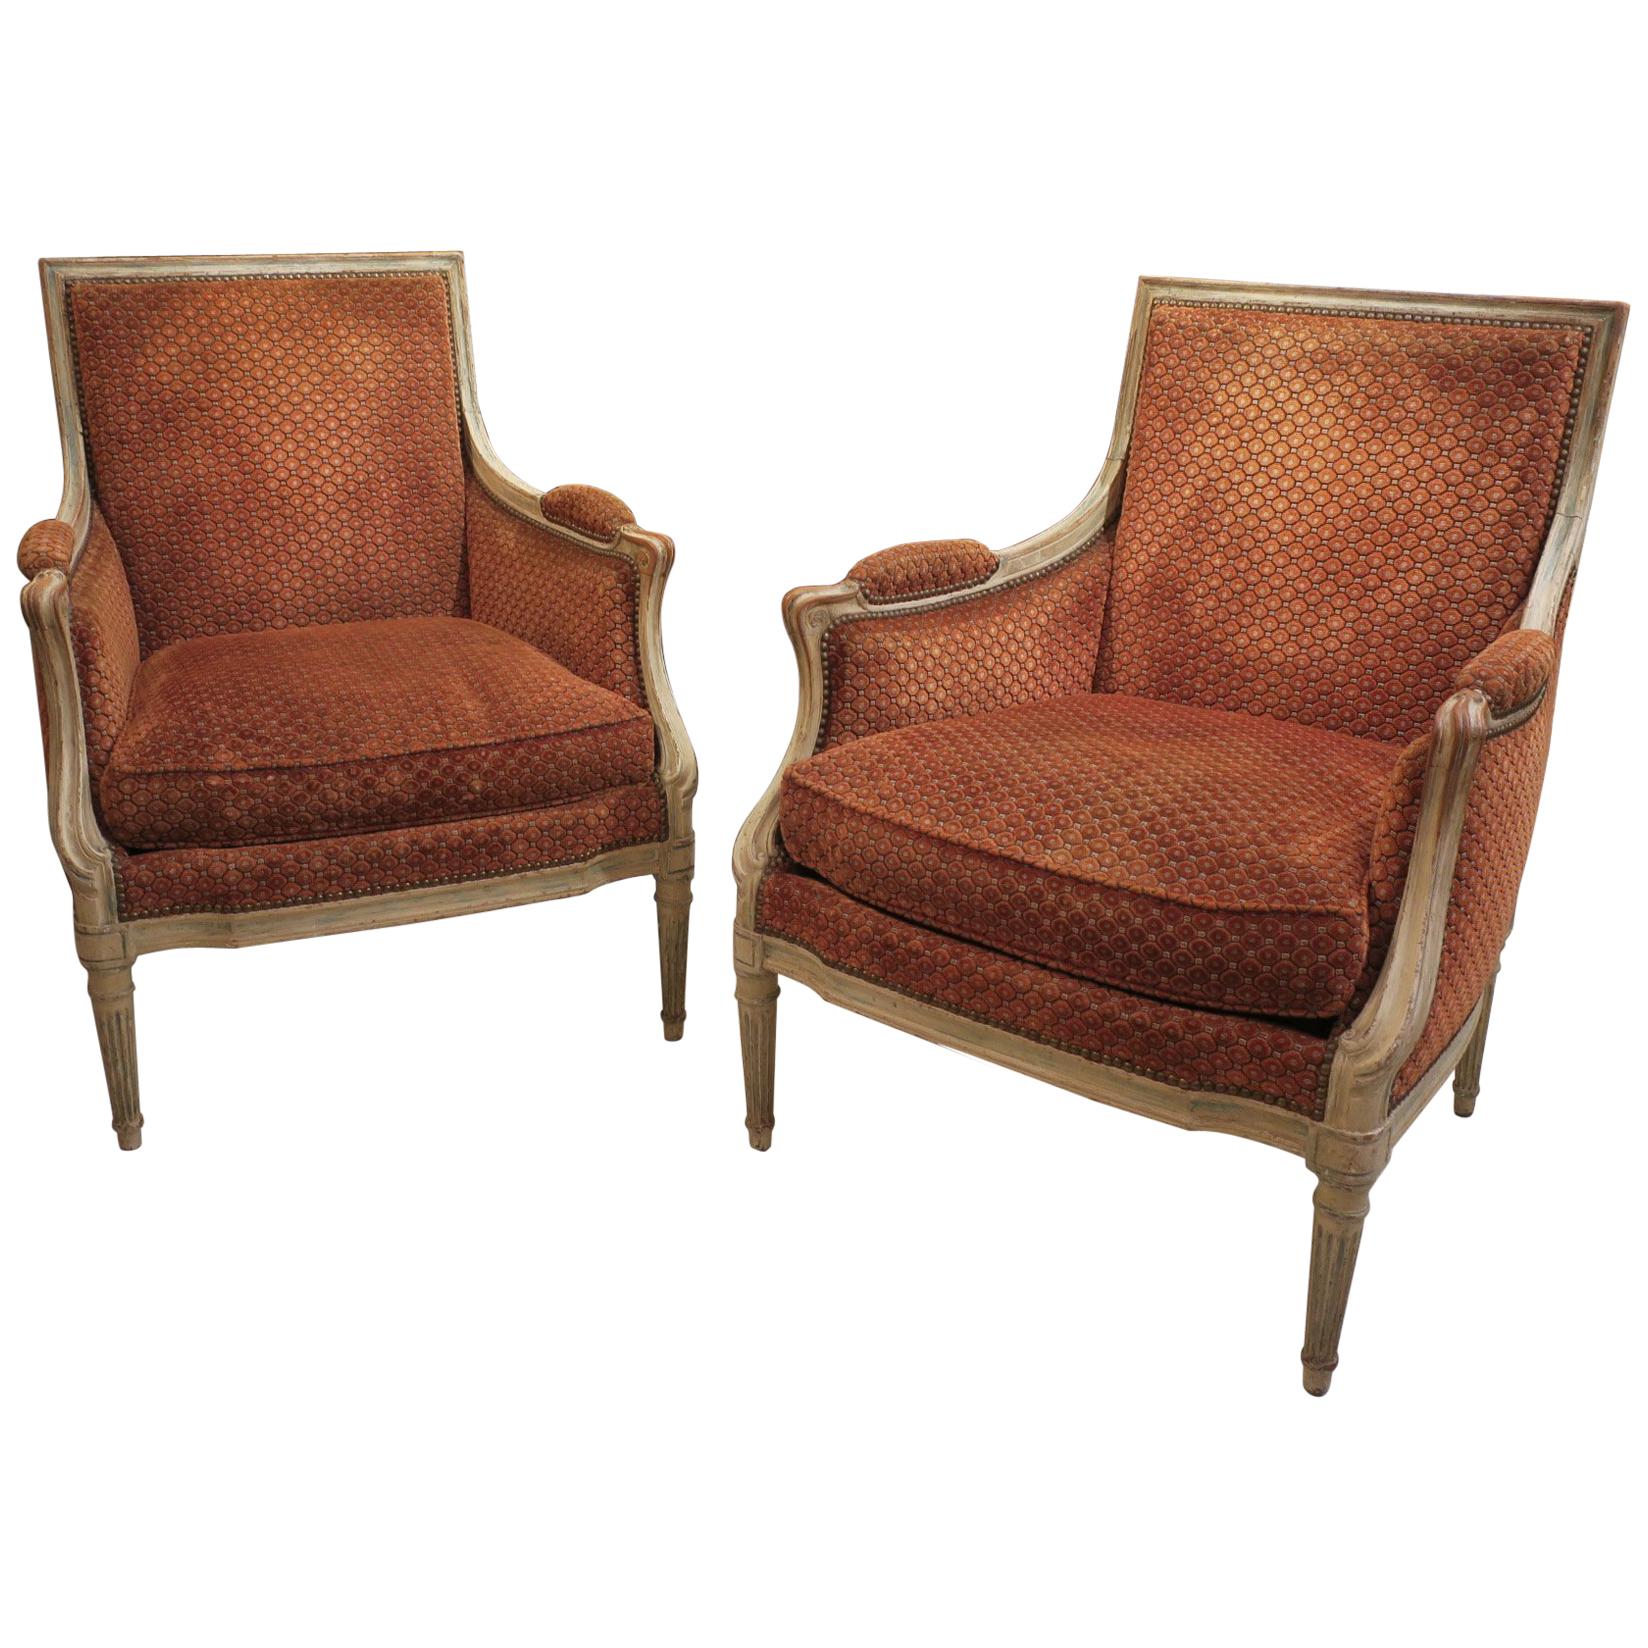 Pair of French Late 18th Century Louis XVI Bergères